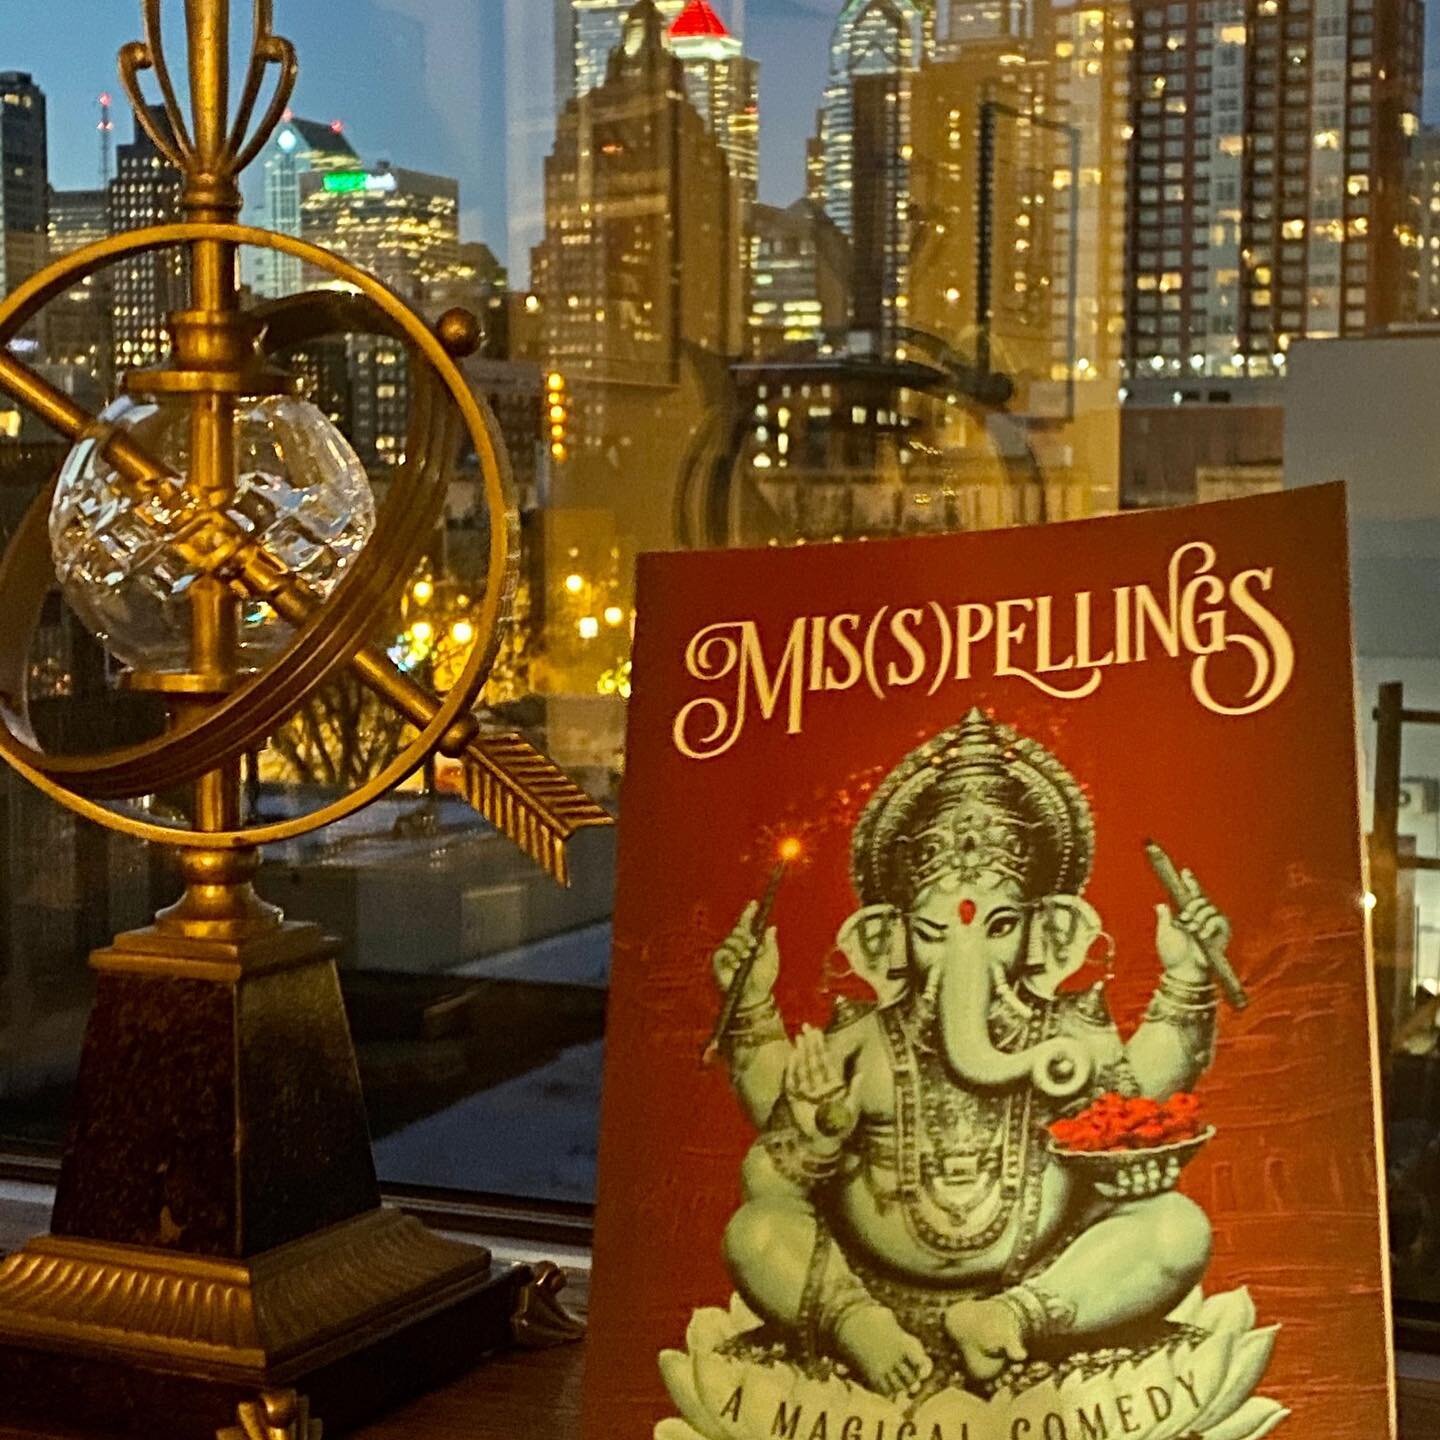 My new book &ldquo;Mis(s)pellings&rdquo; against the beautiful Philadelphia skyline. Thanks to my good friend Dave Jannetta for the great photo.  https://www.amazon.com/Mis-s-pellings-Magical-Comedy/dp/1652125701/ref=tmm_pap_swatch_0?_encoding=UTF8&a